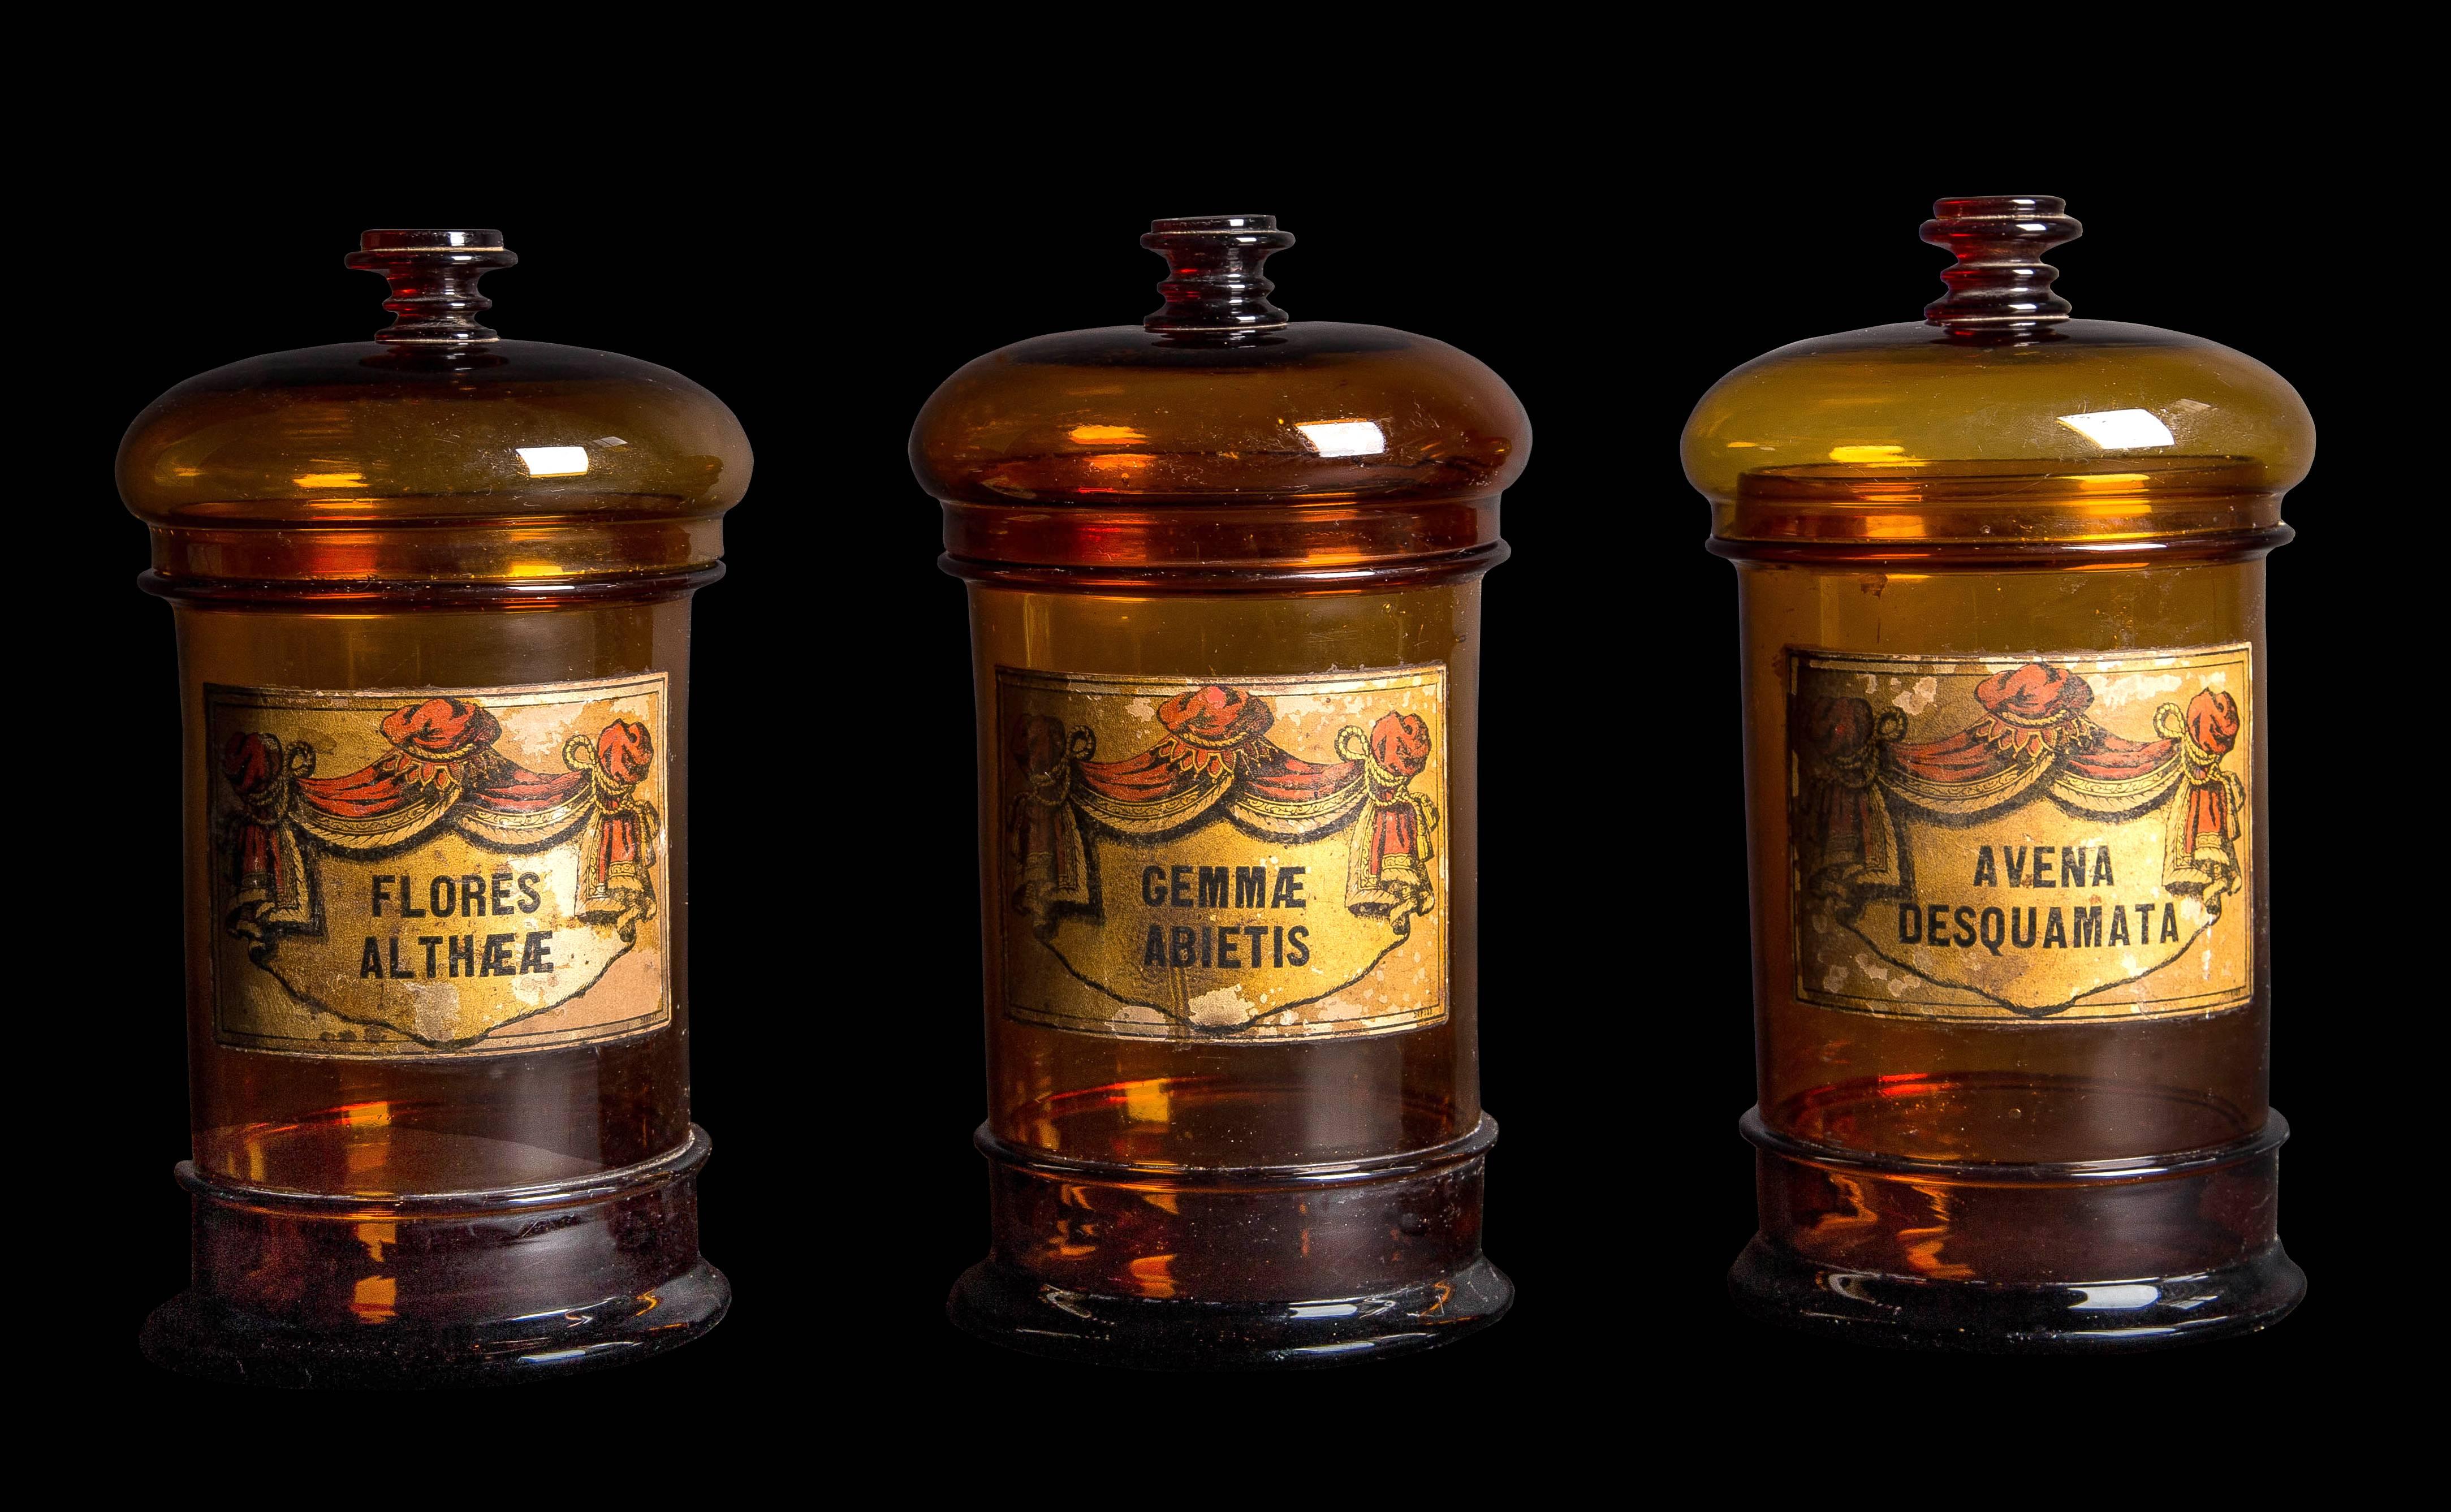 So rare to find now, of dramatic scale and architectural form - a set of three handblown amber glass apothecary jars with beautiful balloon shape lids and fob handles, mid-19th century. All in excellent condition. The labels are highly decorative